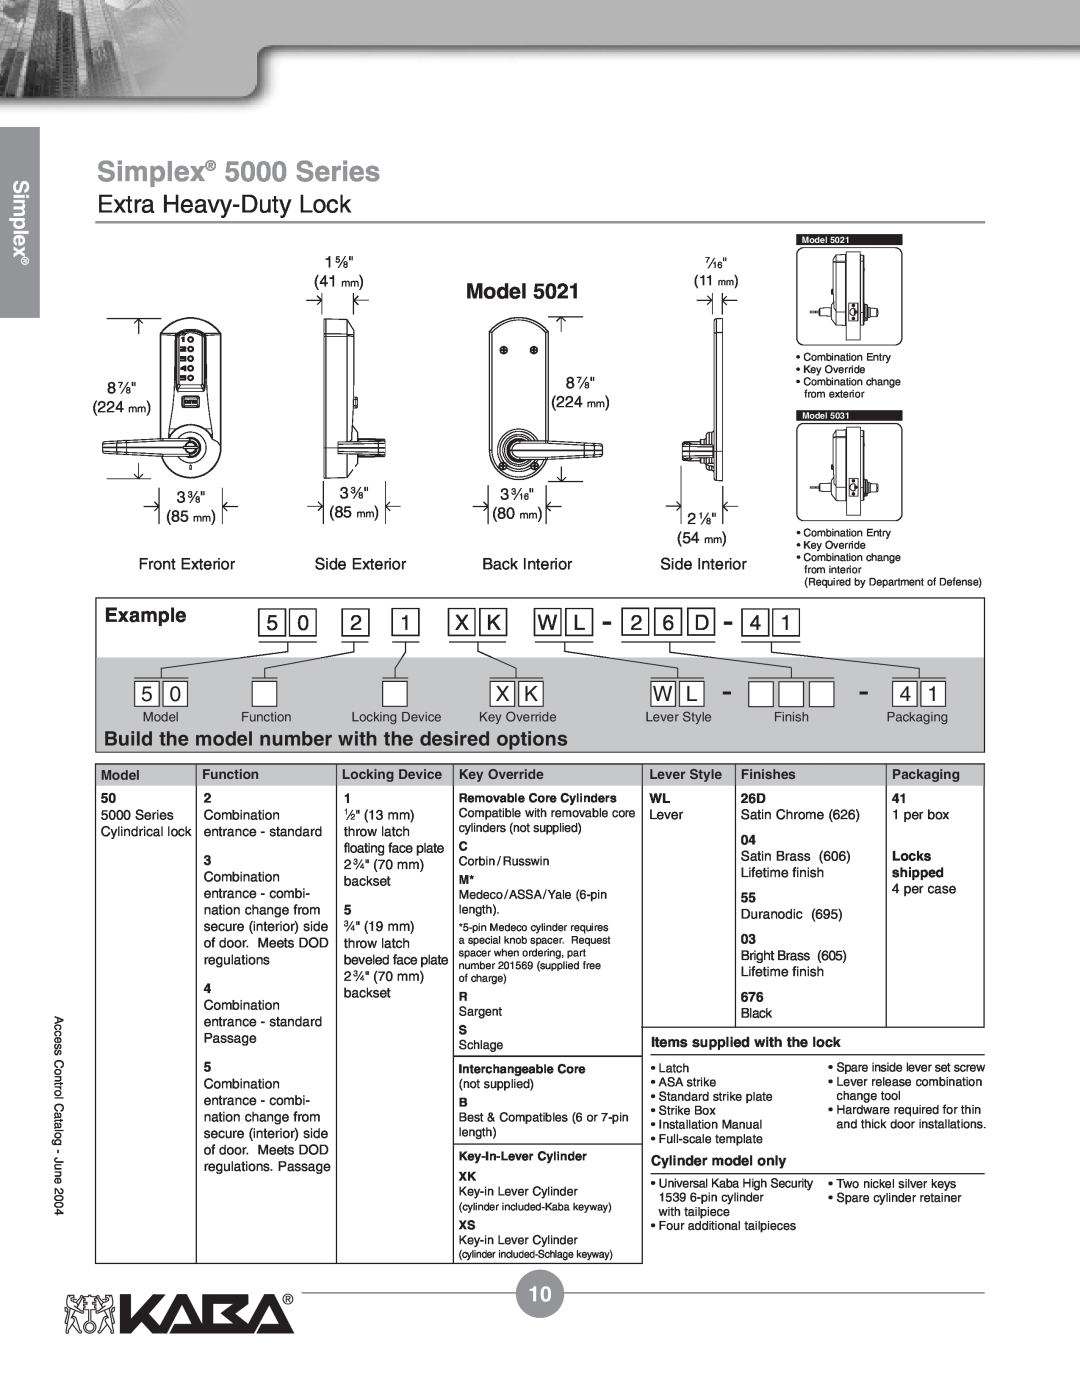 Assa Mechanical Pushbutton Locks manual Model, X K W L, 2 6 D - 4, Example, Build the model number with the desired options 